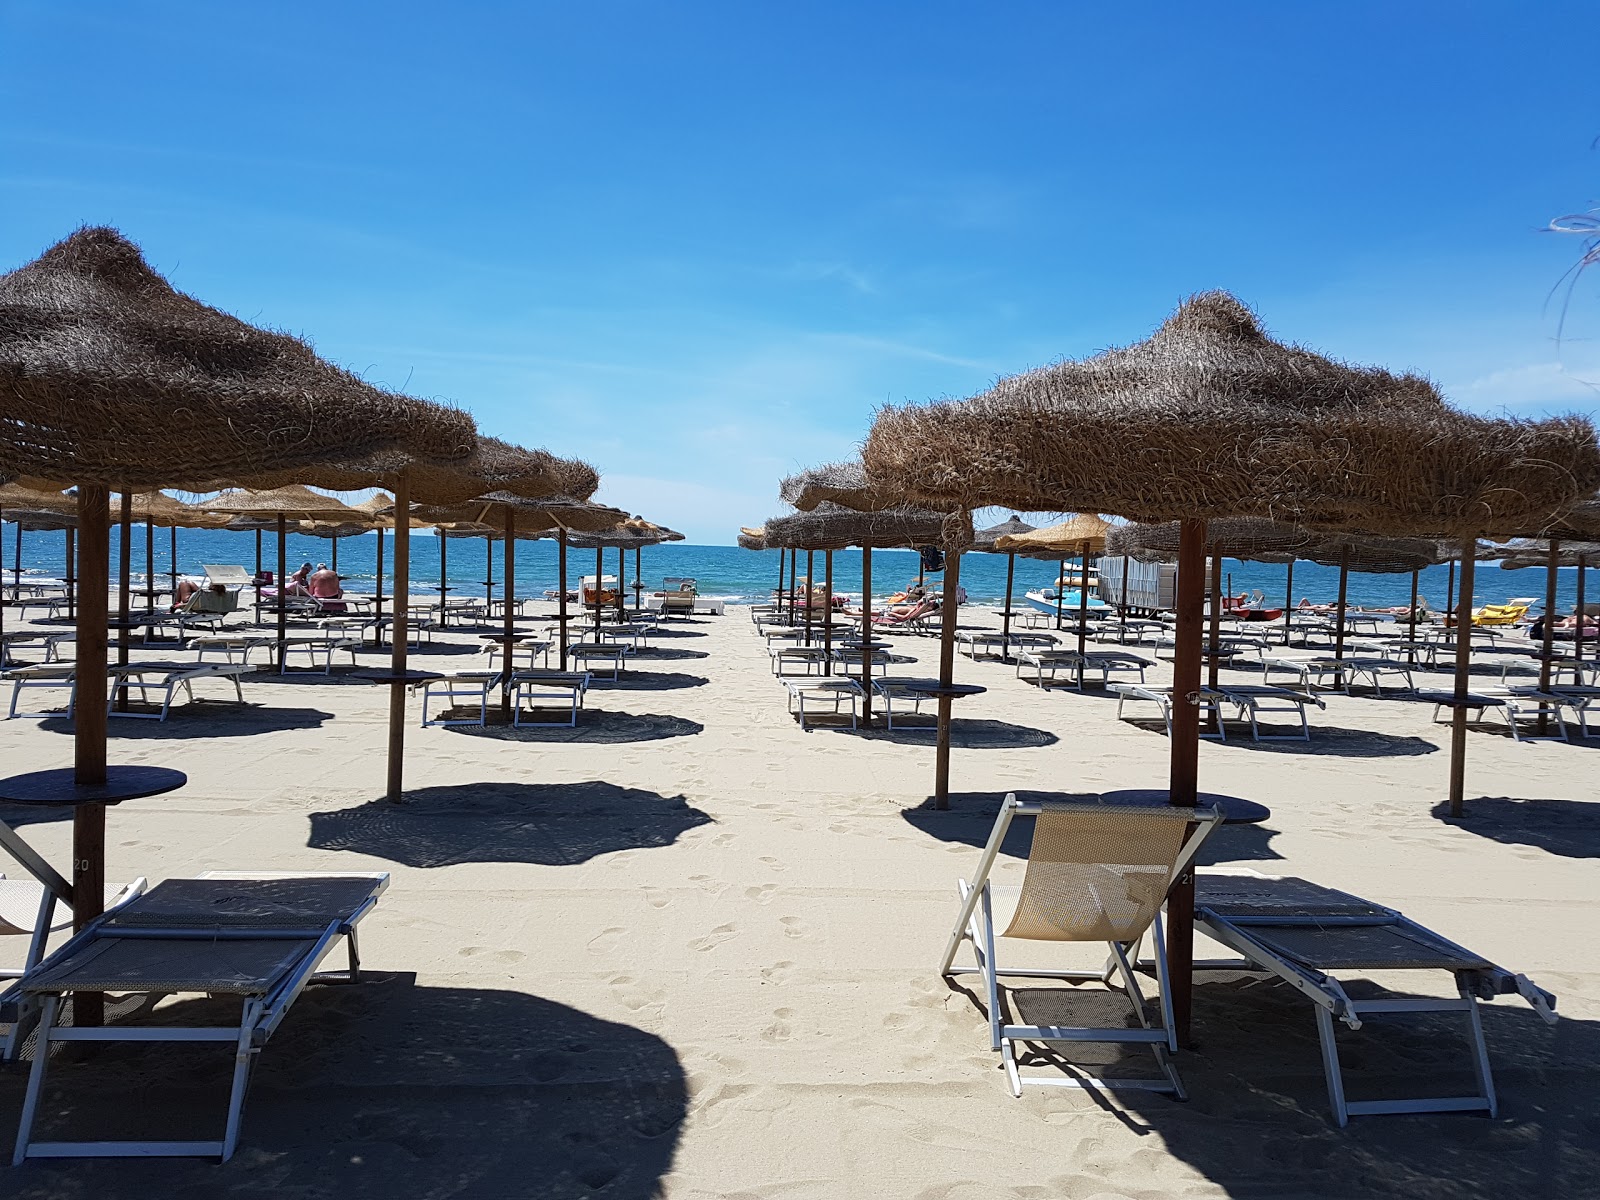 Photo of Spiaggia Libera Tirrenia - popular place among relax connoisseurs